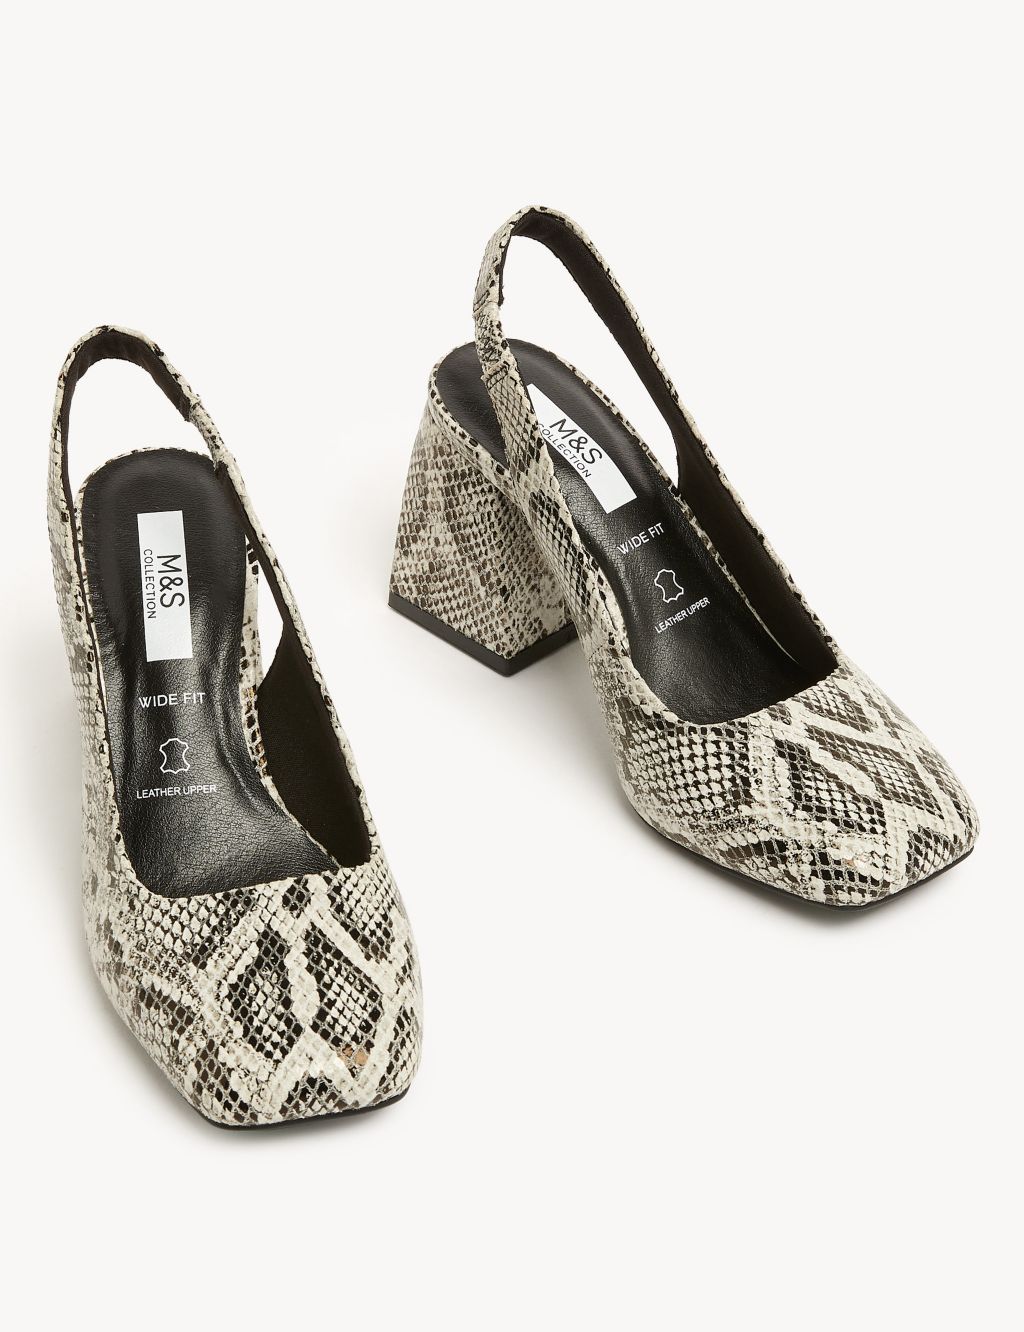 Wide Fit Leather Snake Slingback Shoes image 2